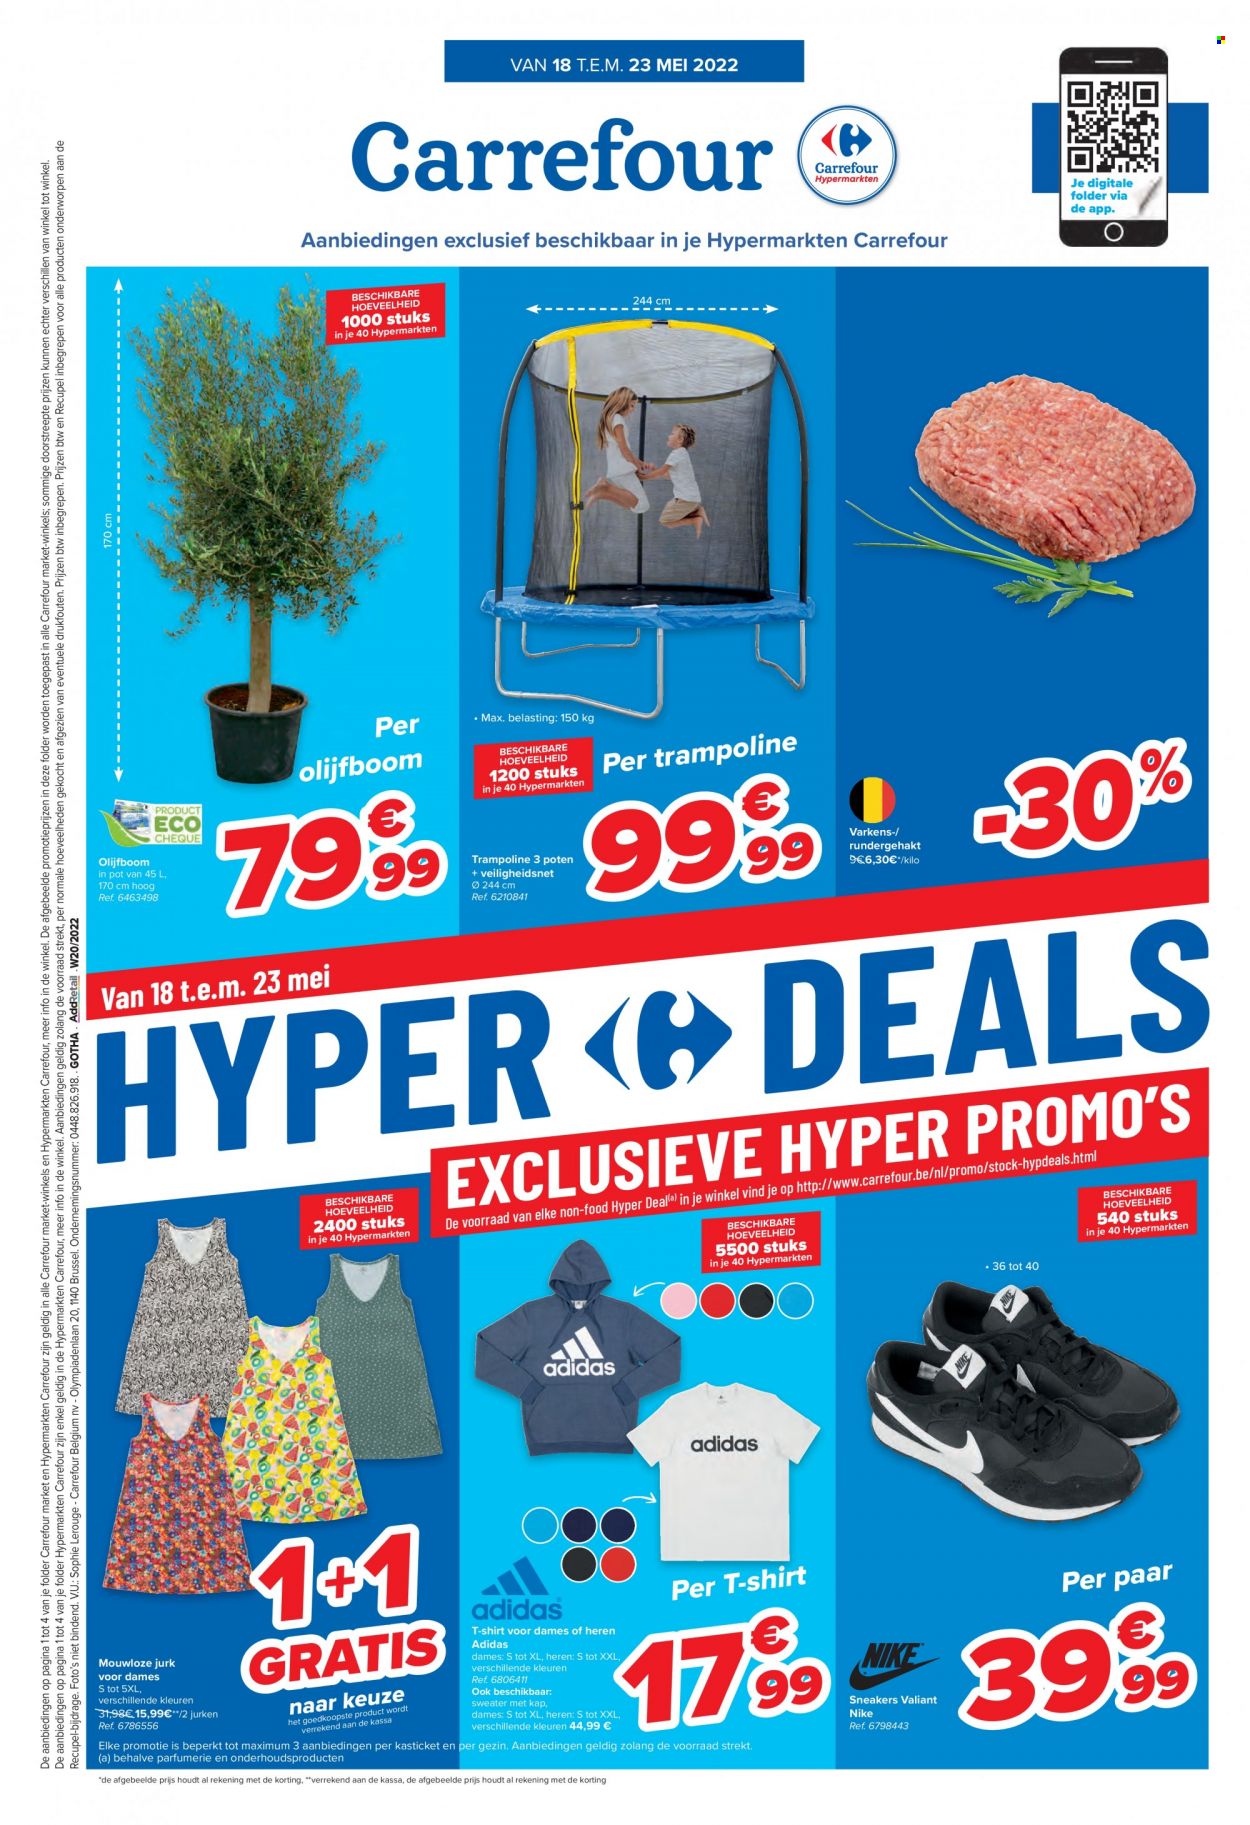 Catalogue Carrefour hypermarkt - 18.5.2022 - 23.5.2022. Page 1.